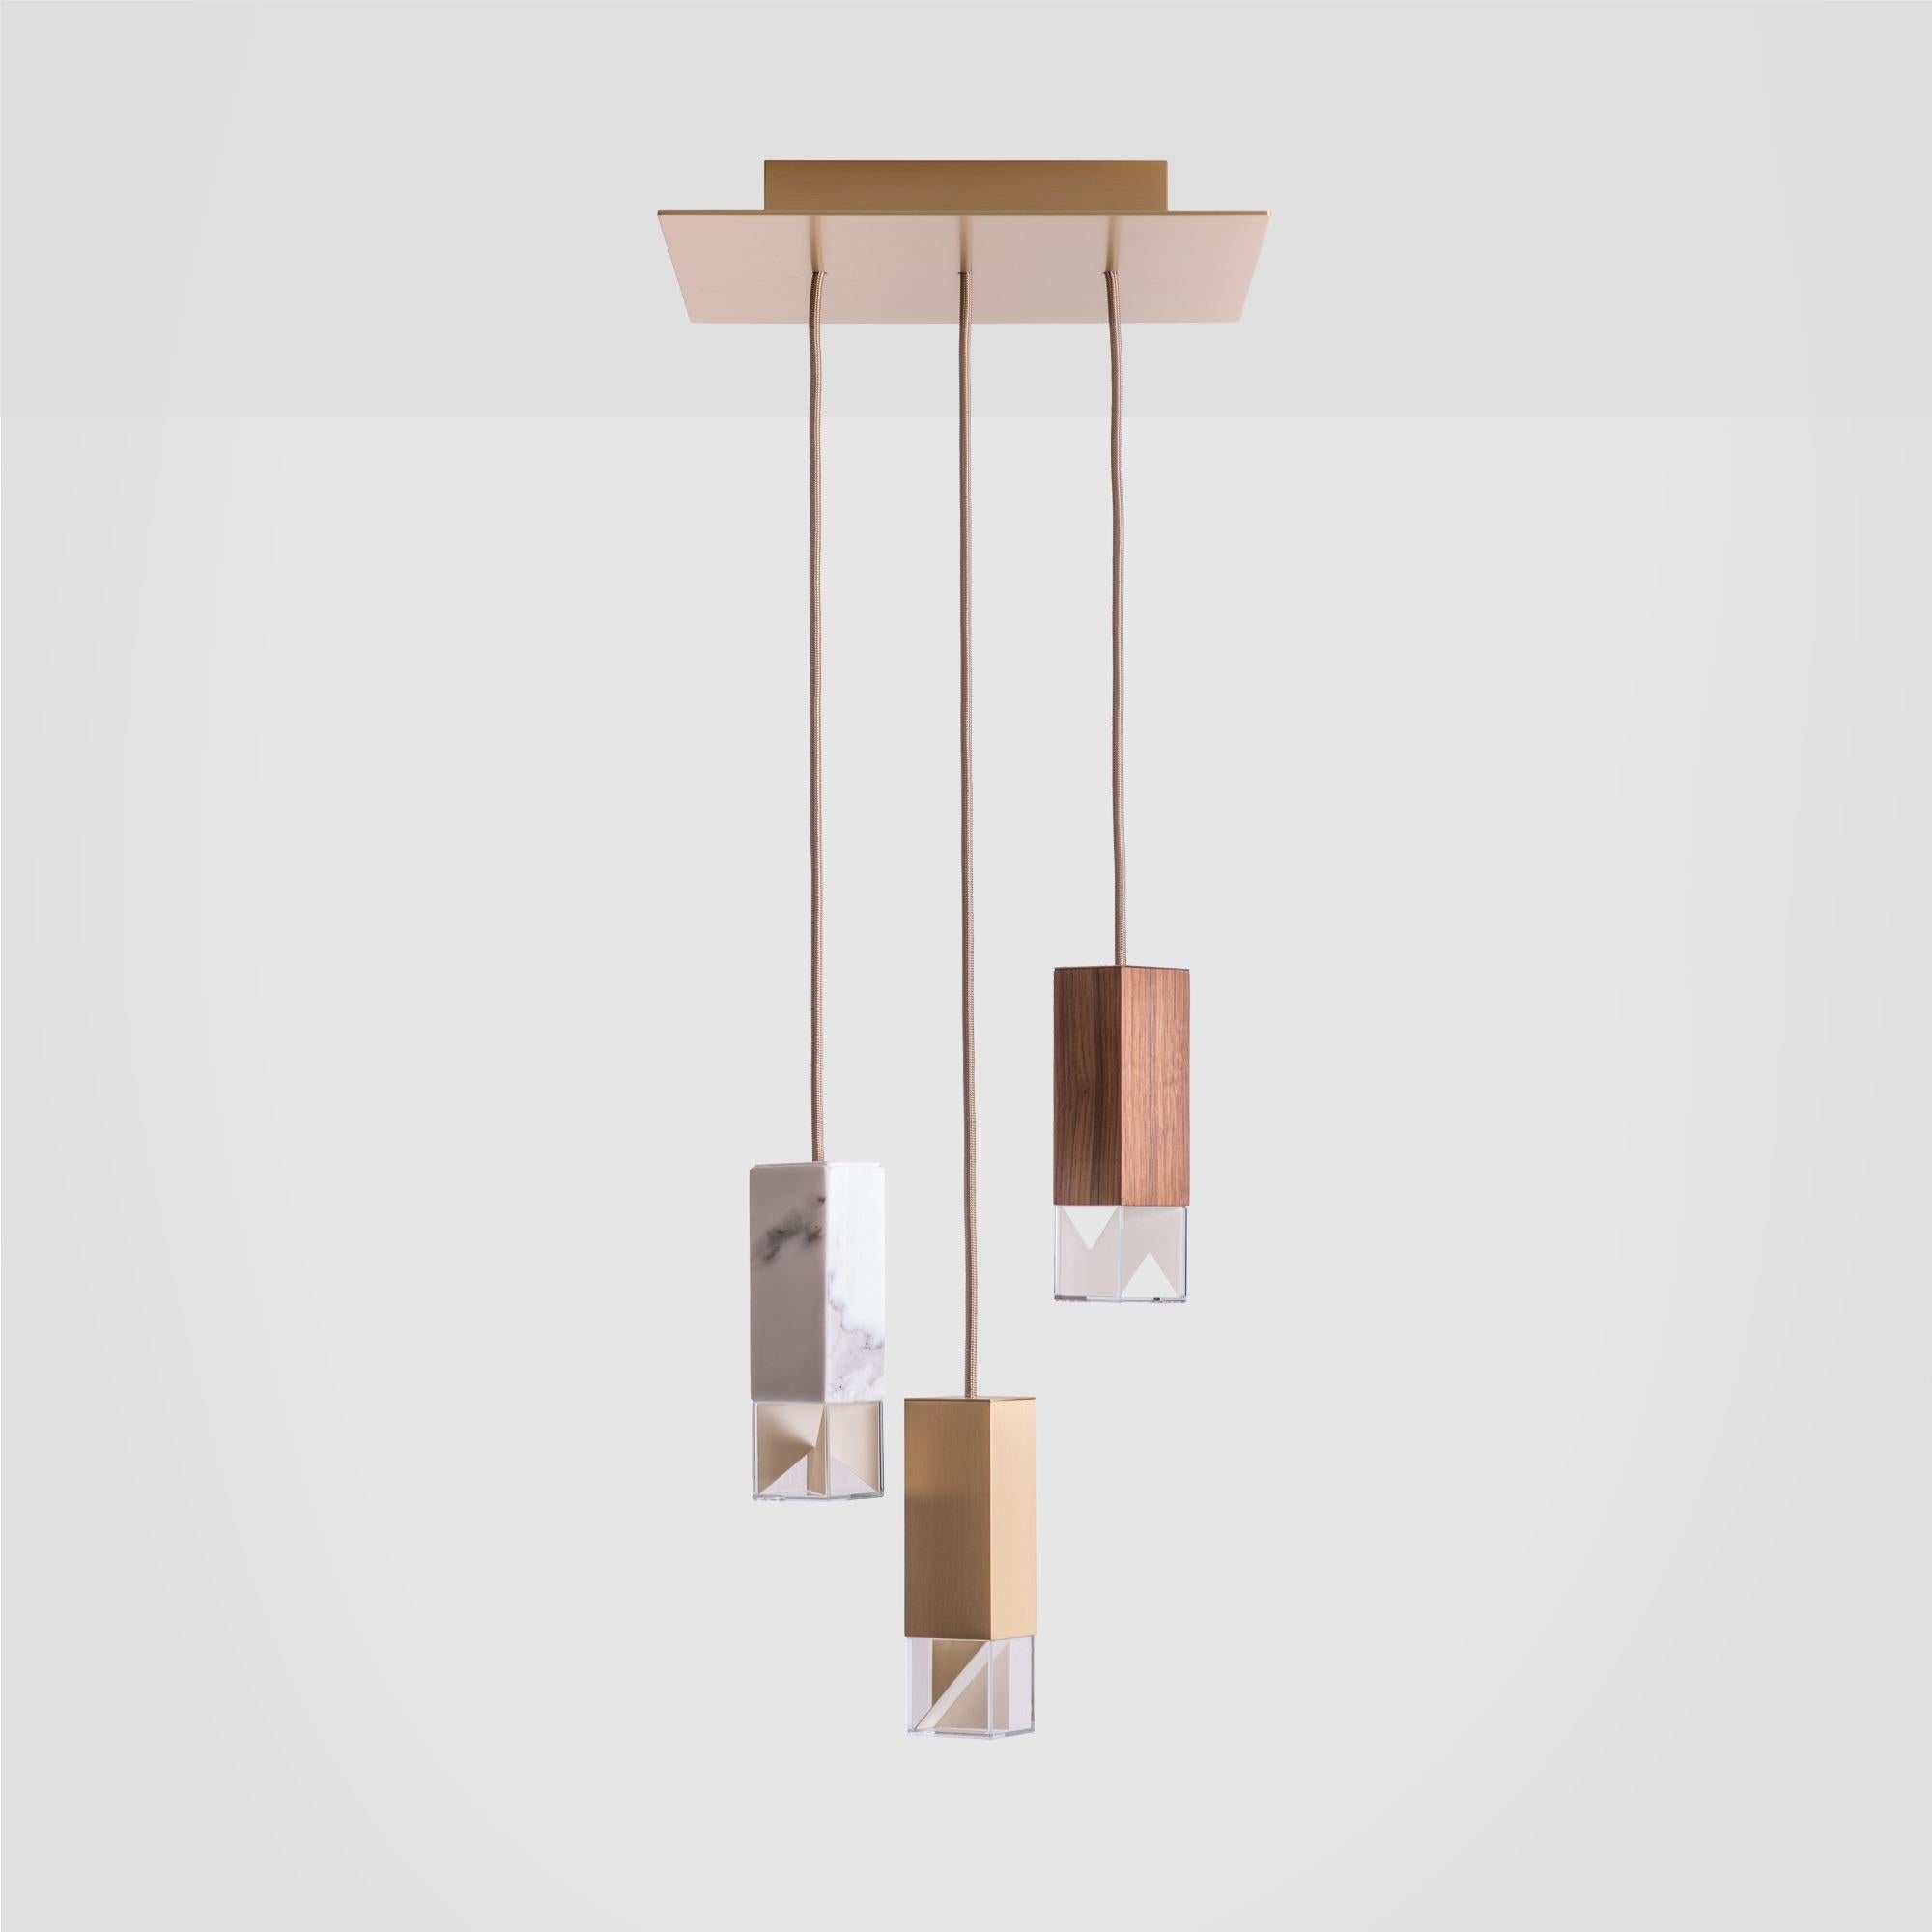 This exclusive chandelier brings together the three materials that define the Lamp/One collection by Formaminima. Perfect in any modern interior, where it will bring a refined, eclectic touch, this chandelier hangs from a square ceiling plate (30 x